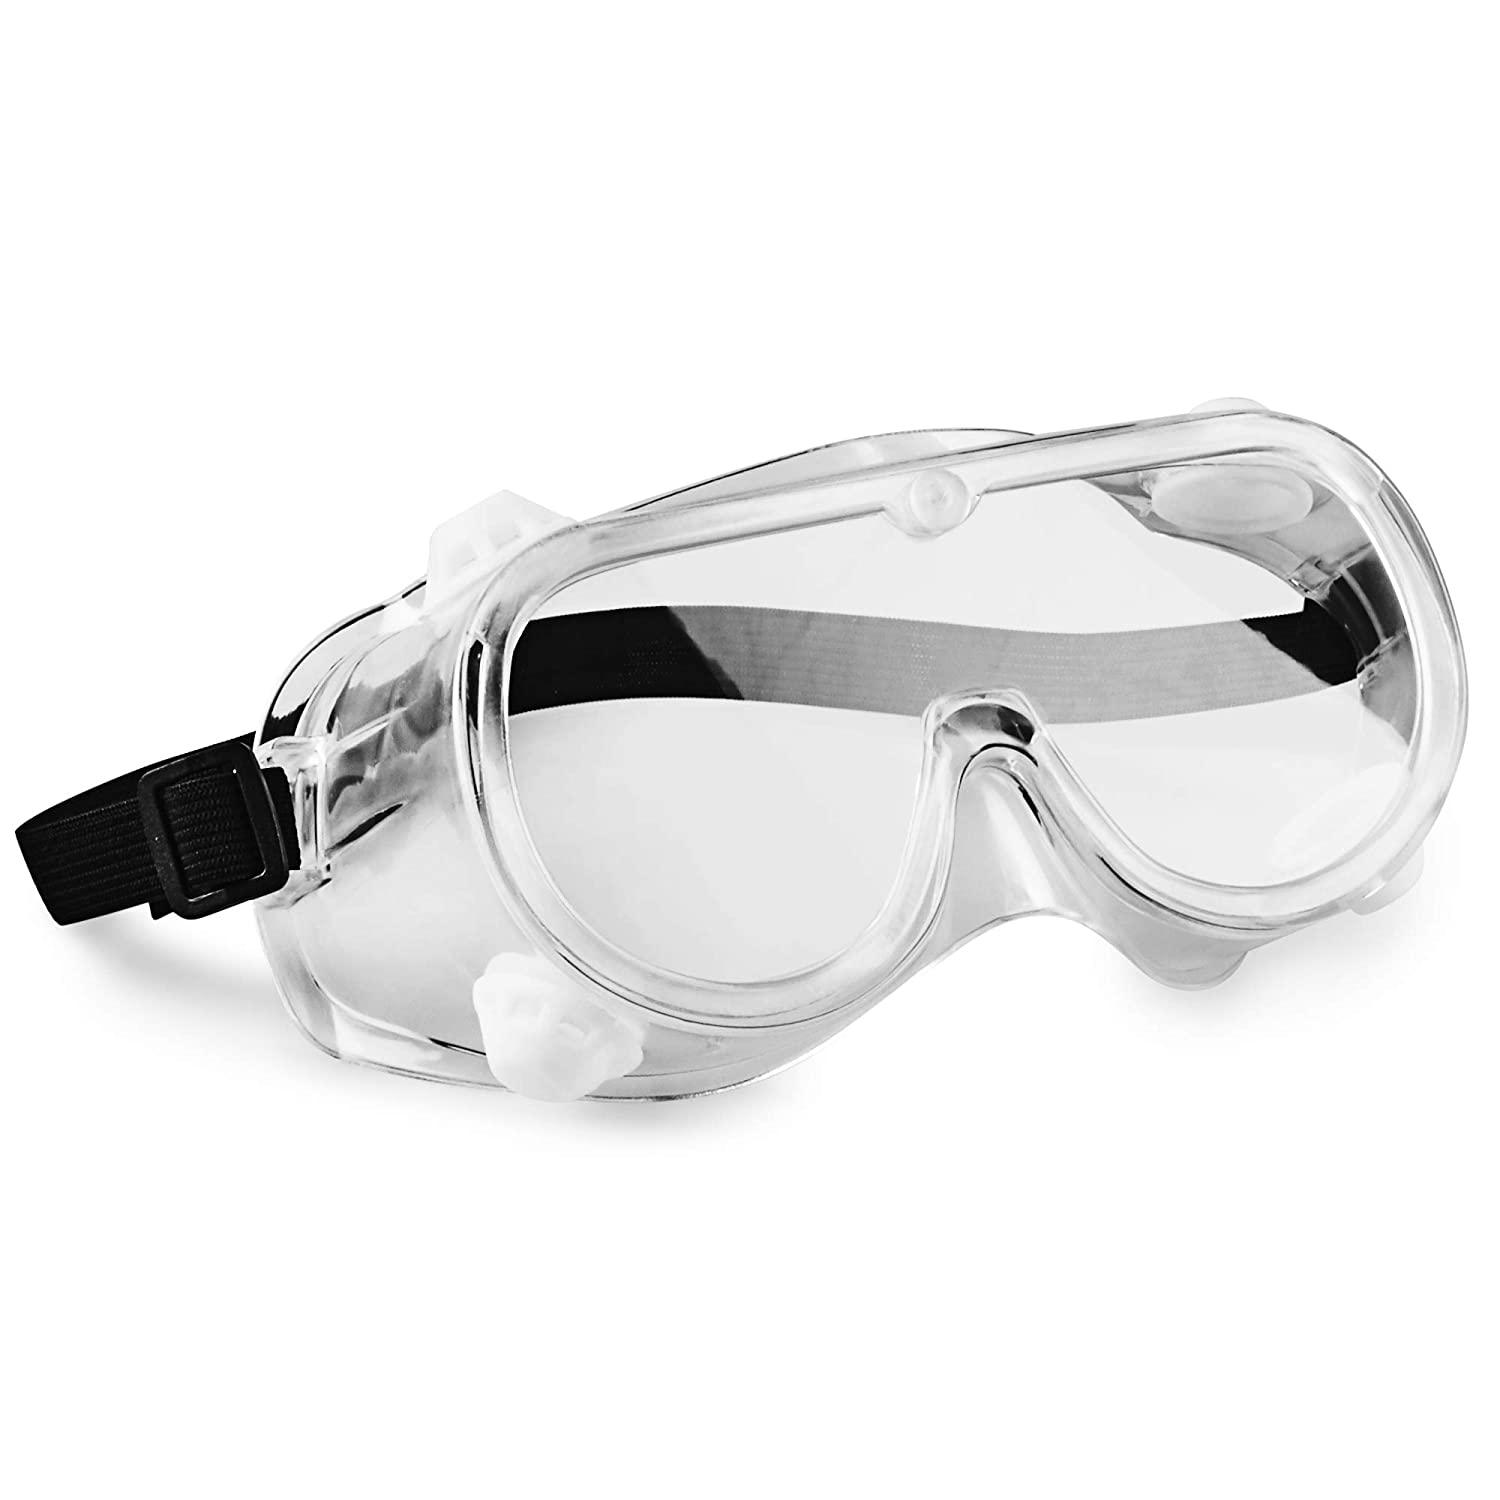 10 6in Clear Safety Goggles for $3.58